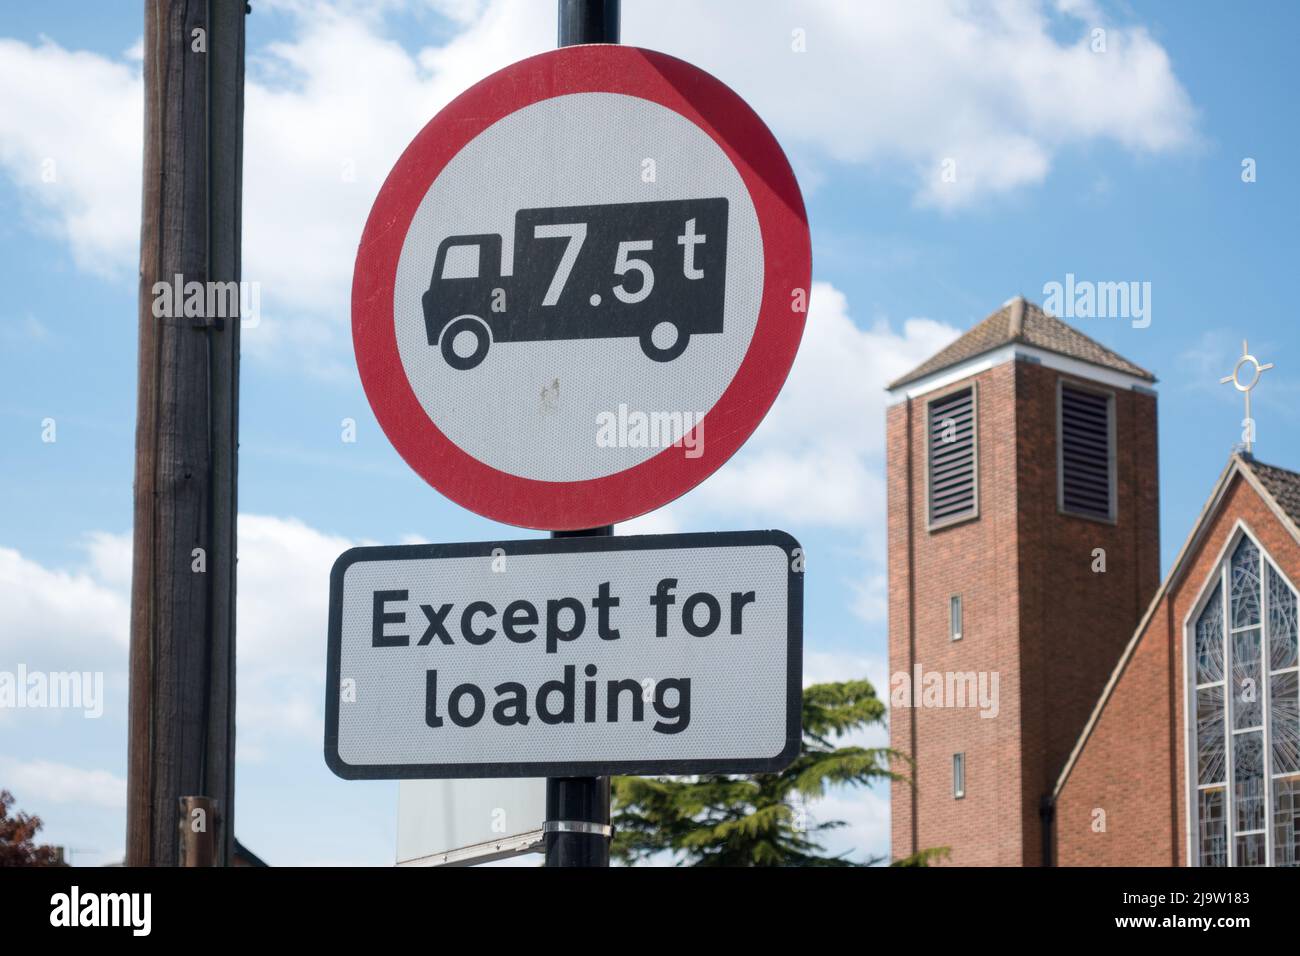 UK road sign with restrictions for vehicle weighing over 7.5 tonnes are not allowed unless for Loading Stock Photo